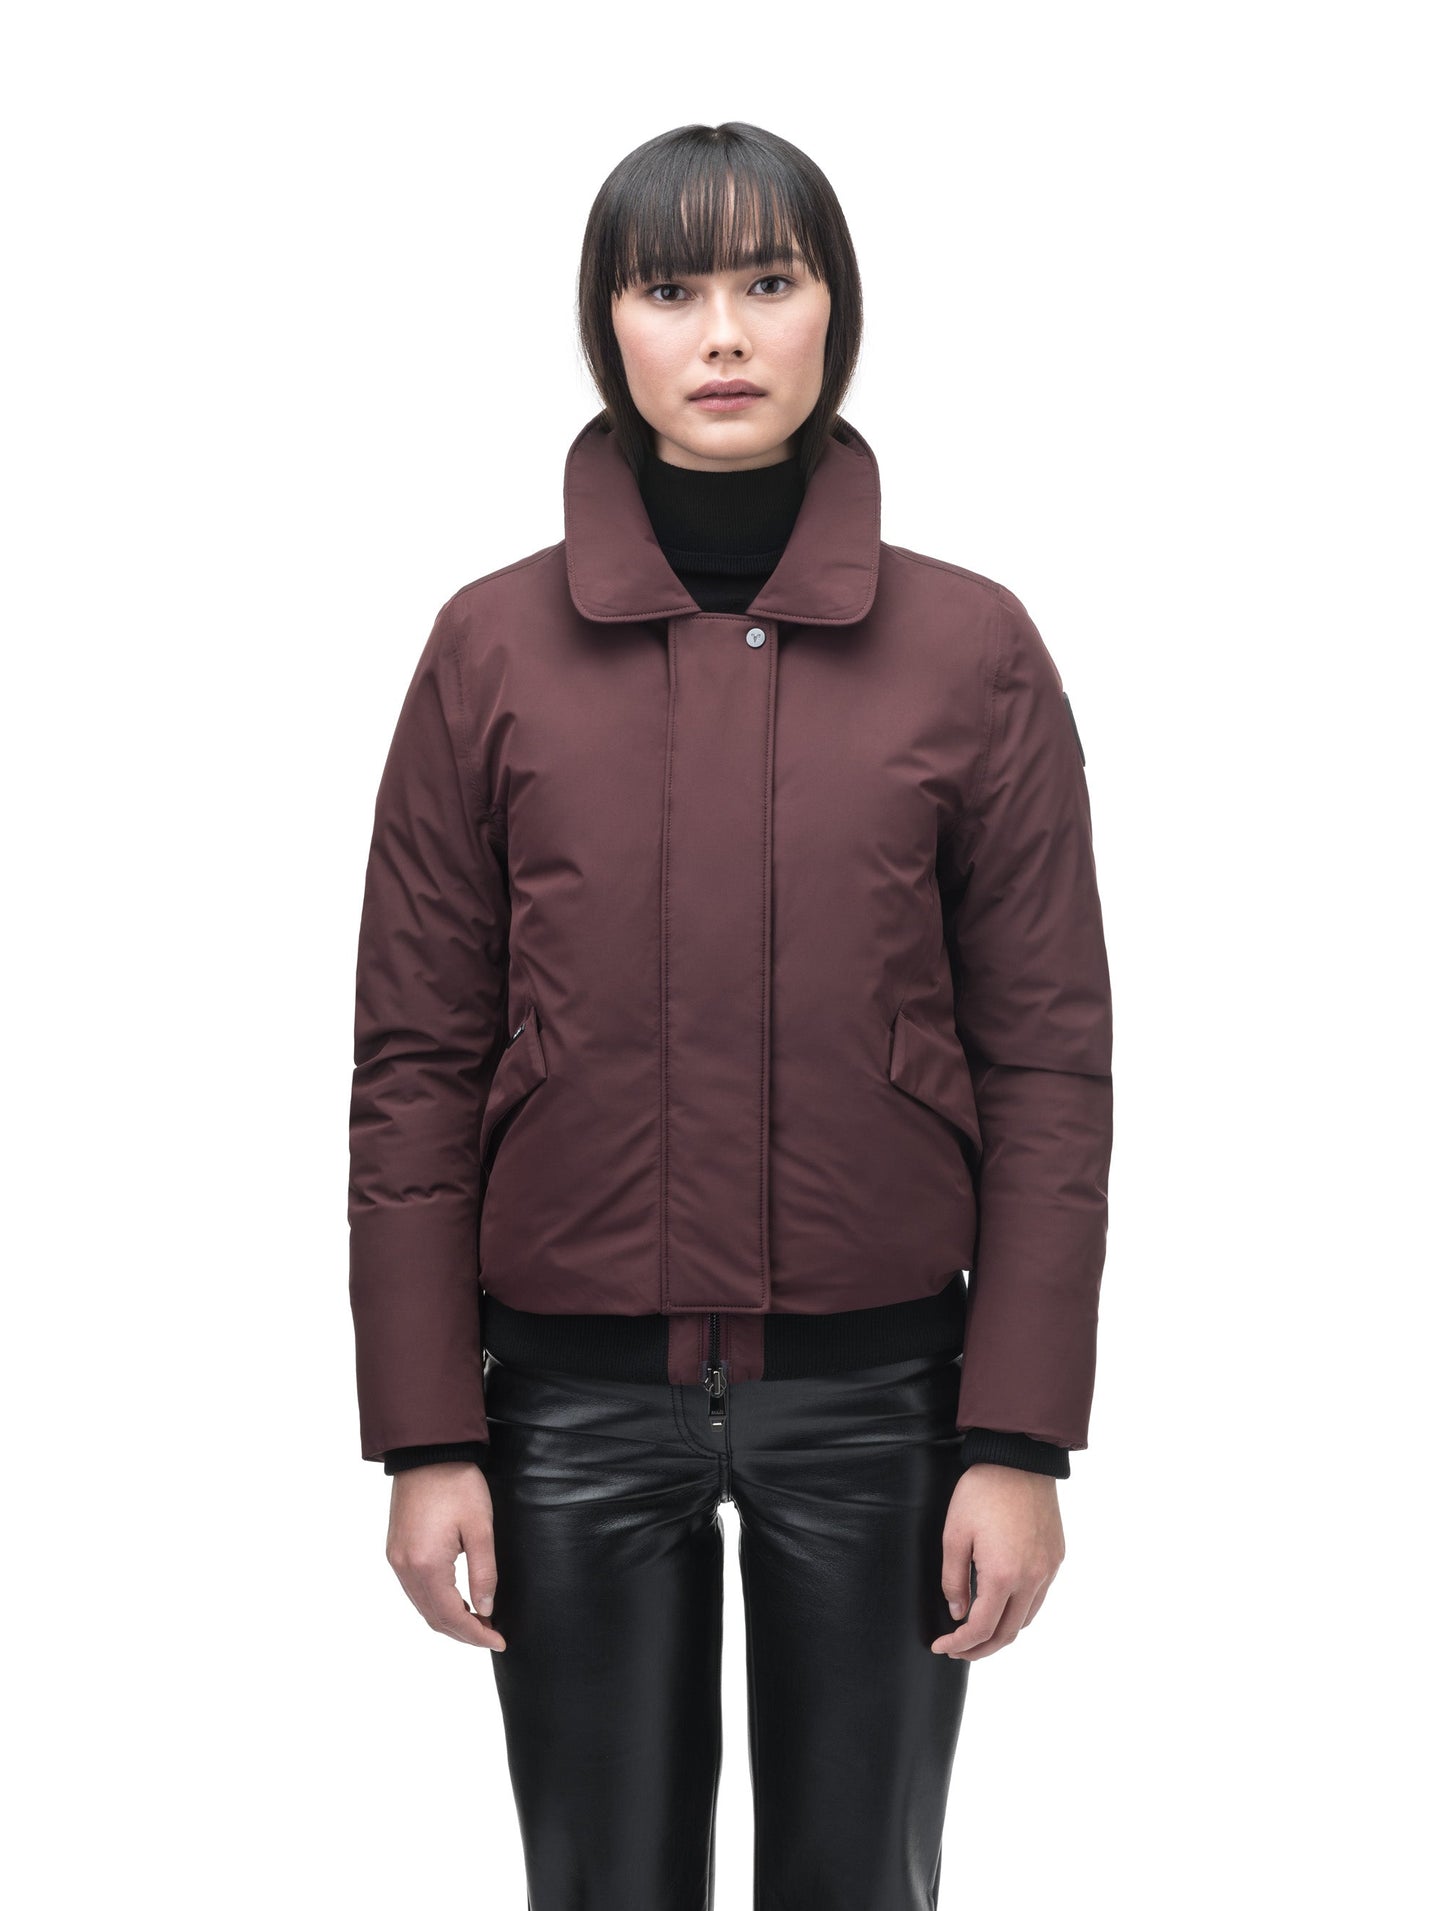 Rae Ladies Aviator Jacket in hip length, Canadian duck down insulation, removable shearling collar with hidden tuckable hood, and two-way front zipper, in Merlot